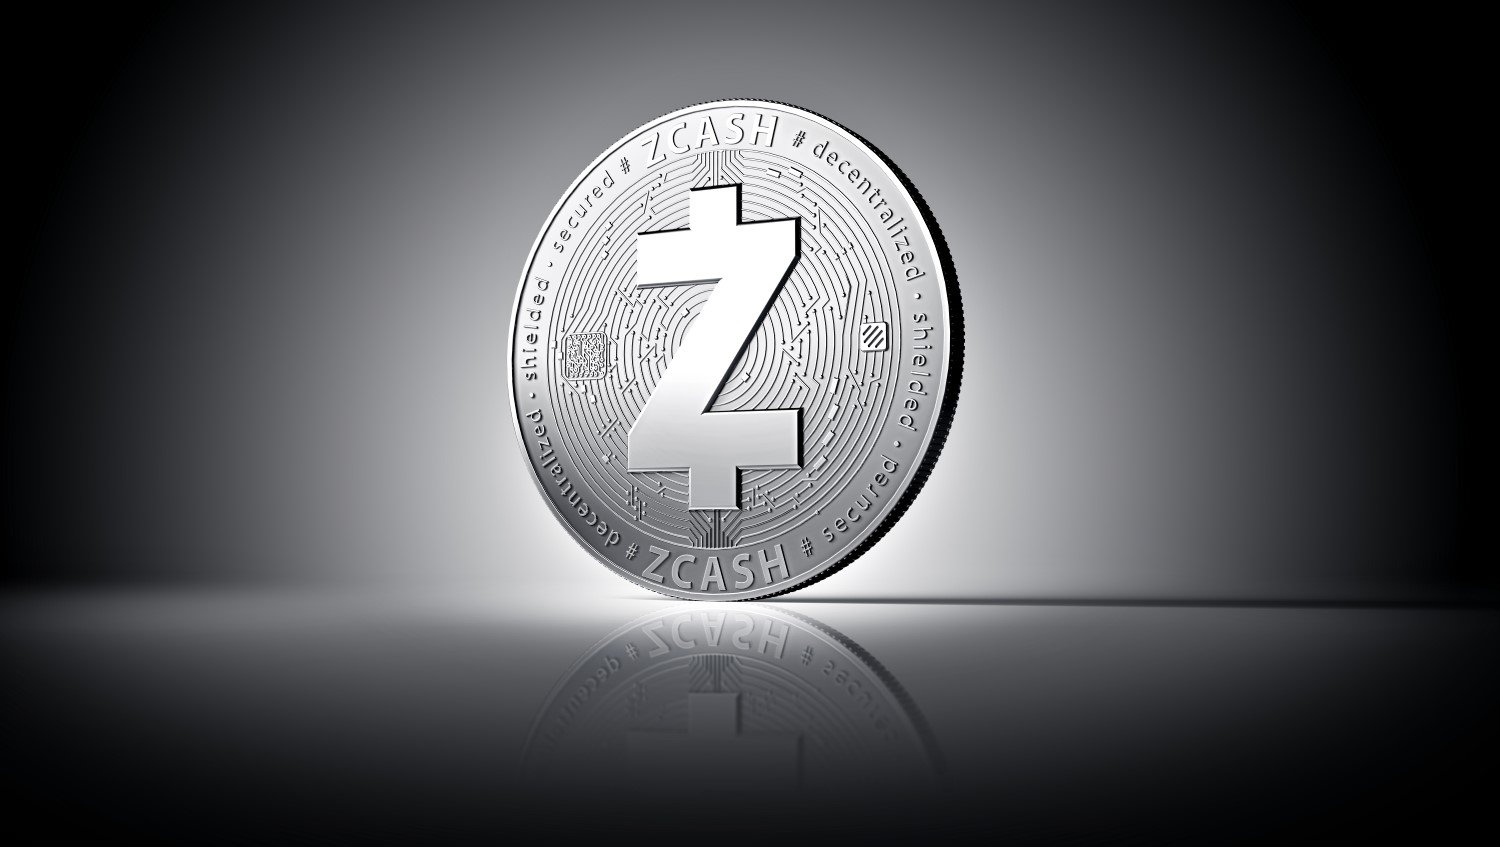 Zcash Sets Stage For ‘Sapling’ Upgrade With New Software Release